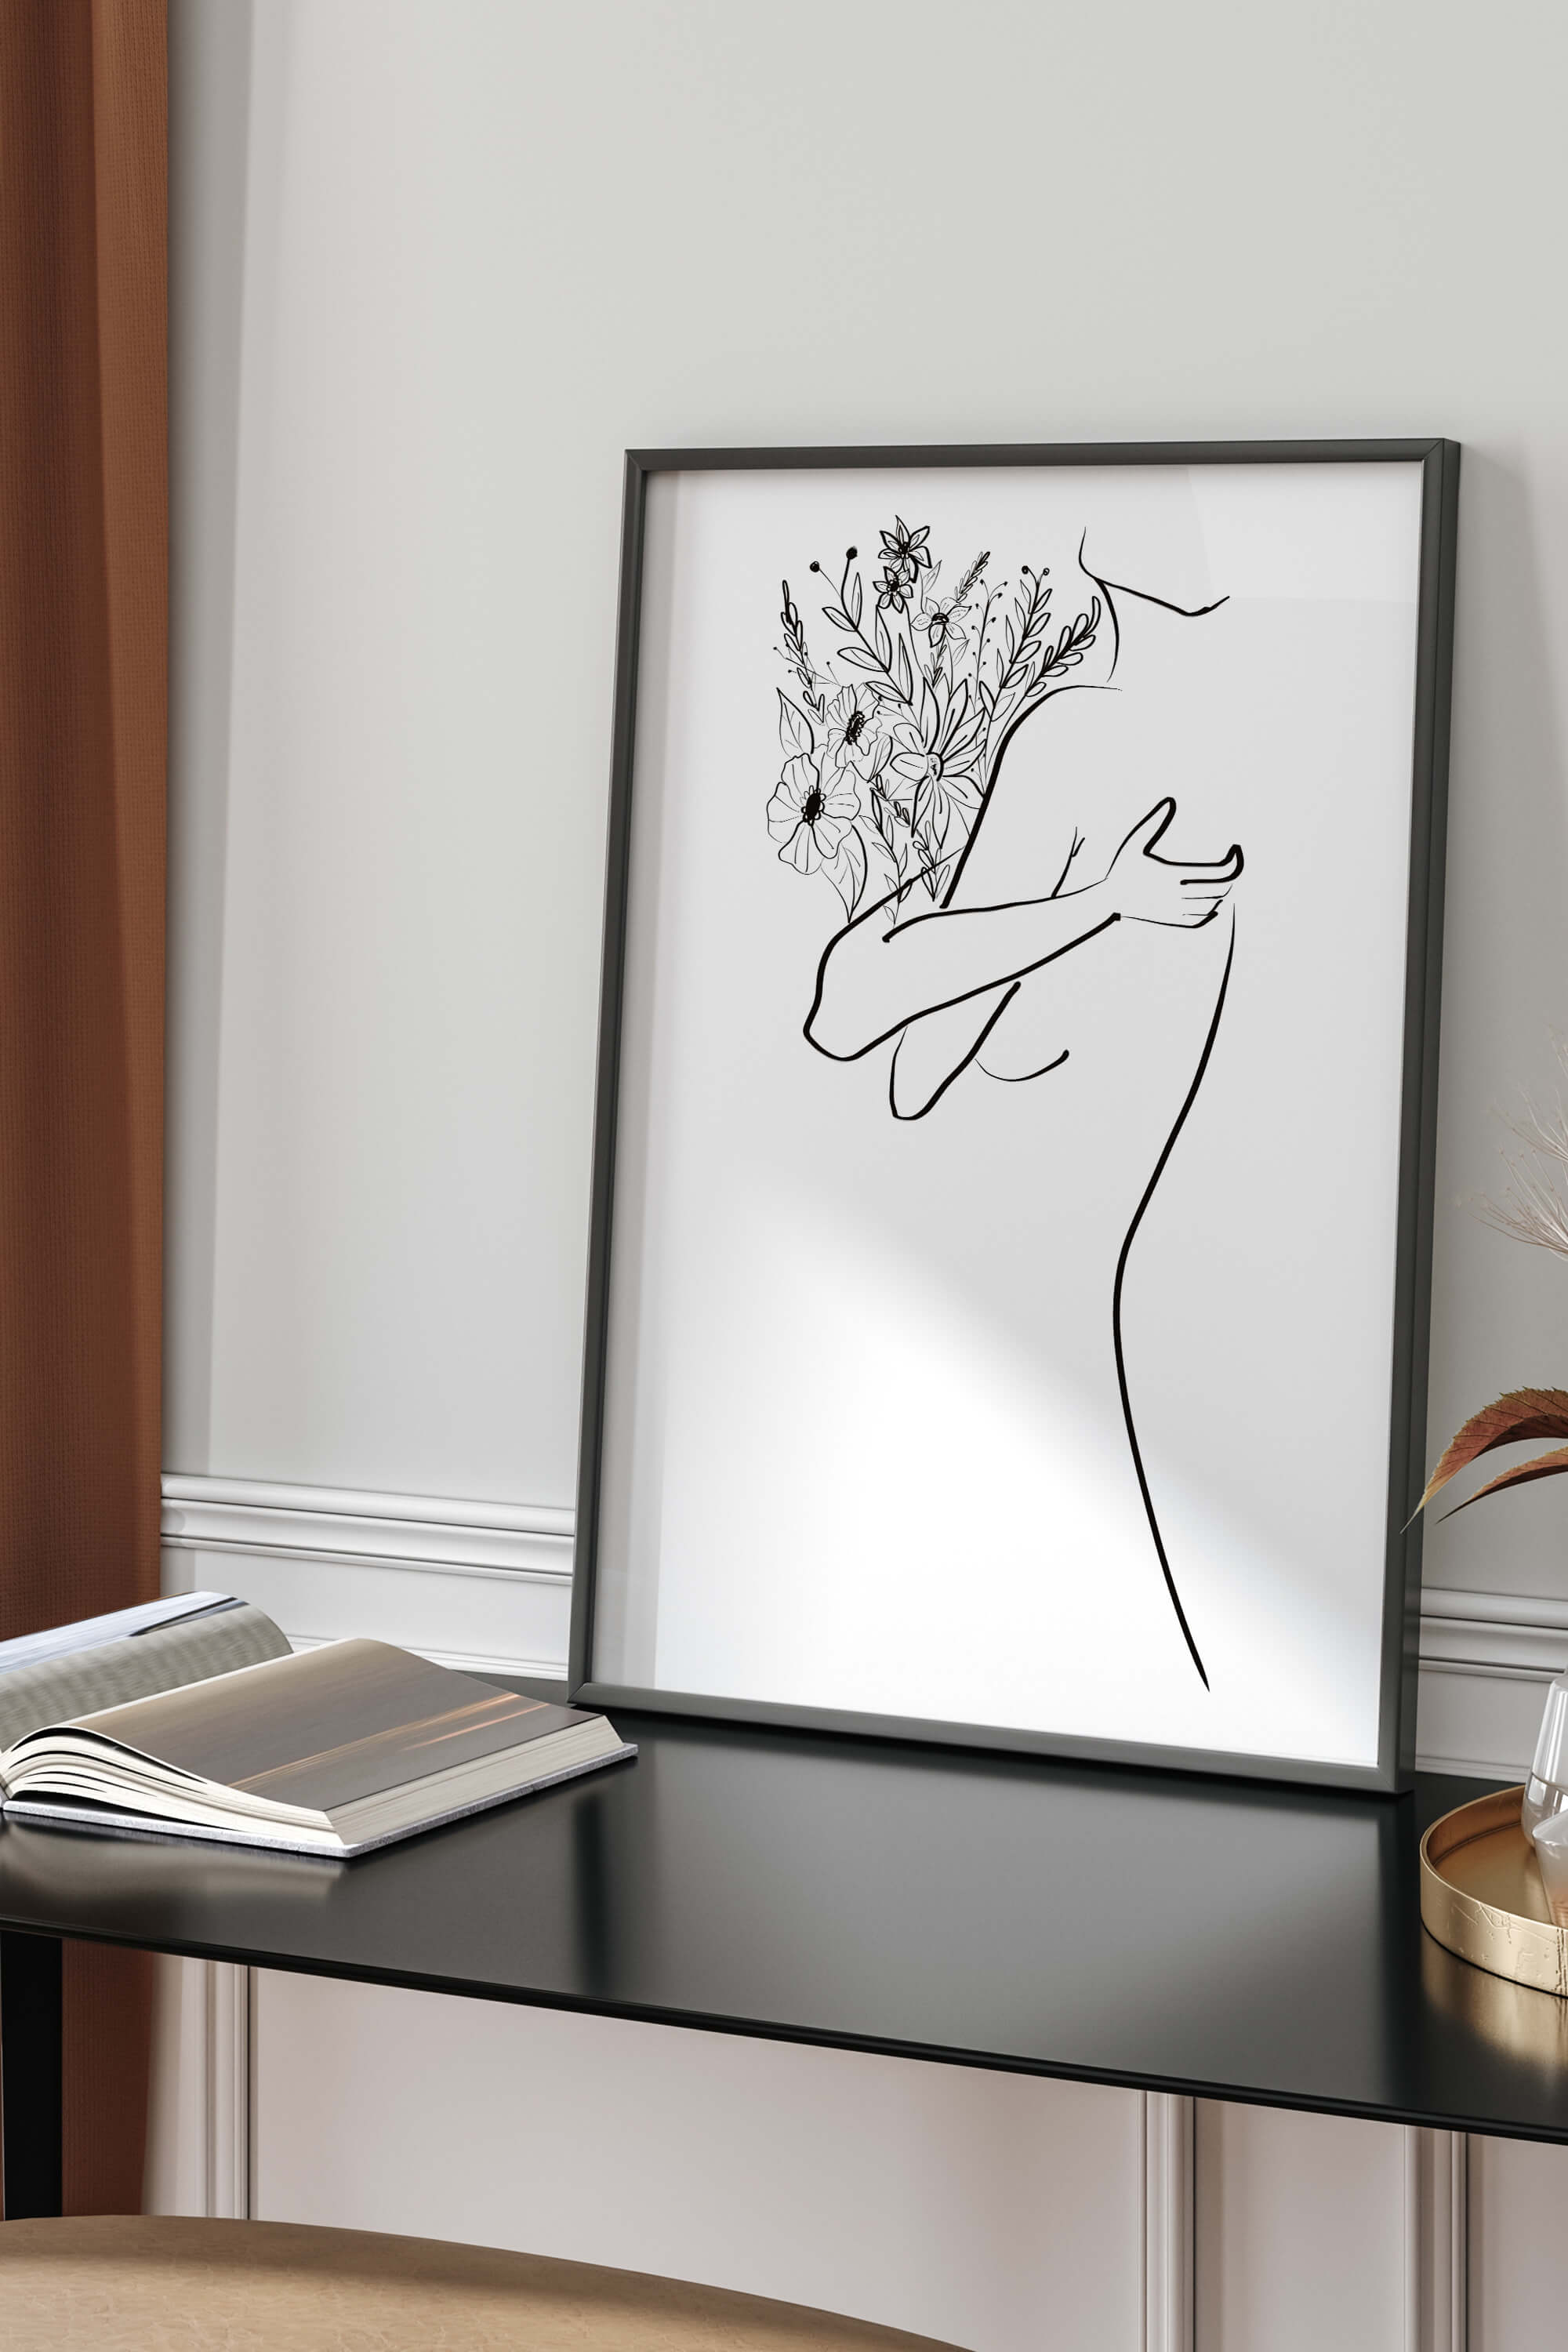 Self-love poster featuring a female body line drawing in black and white. This art print fosters empowerment and appreciation for one's unique beauty, making it a daily reminder to value oneself. Ideal for creating a positive and affirming atmosphere.